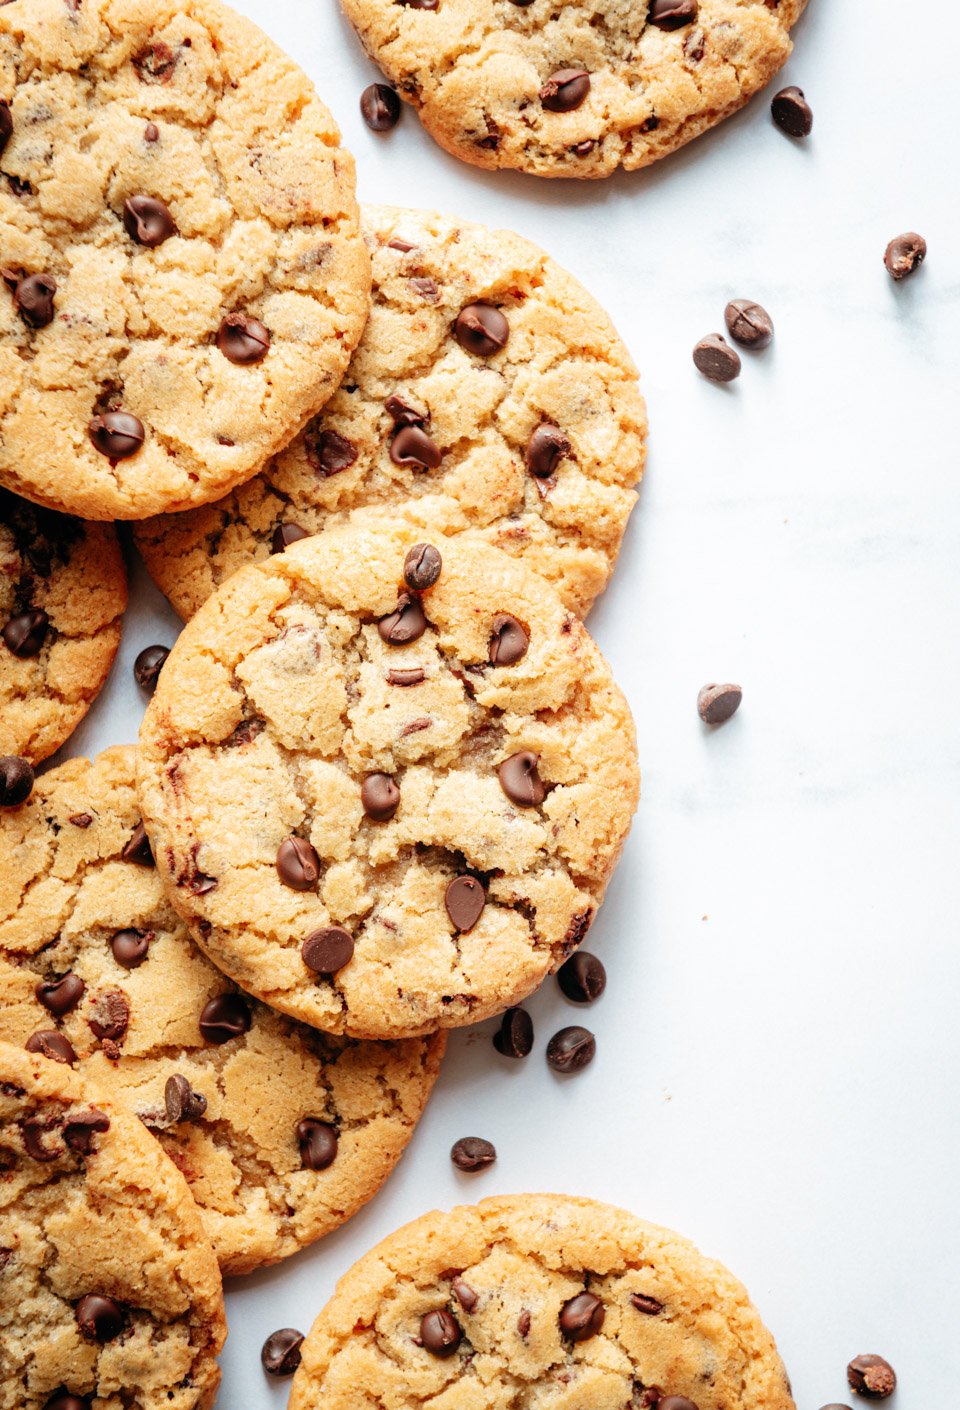 American chocolate chip cookies